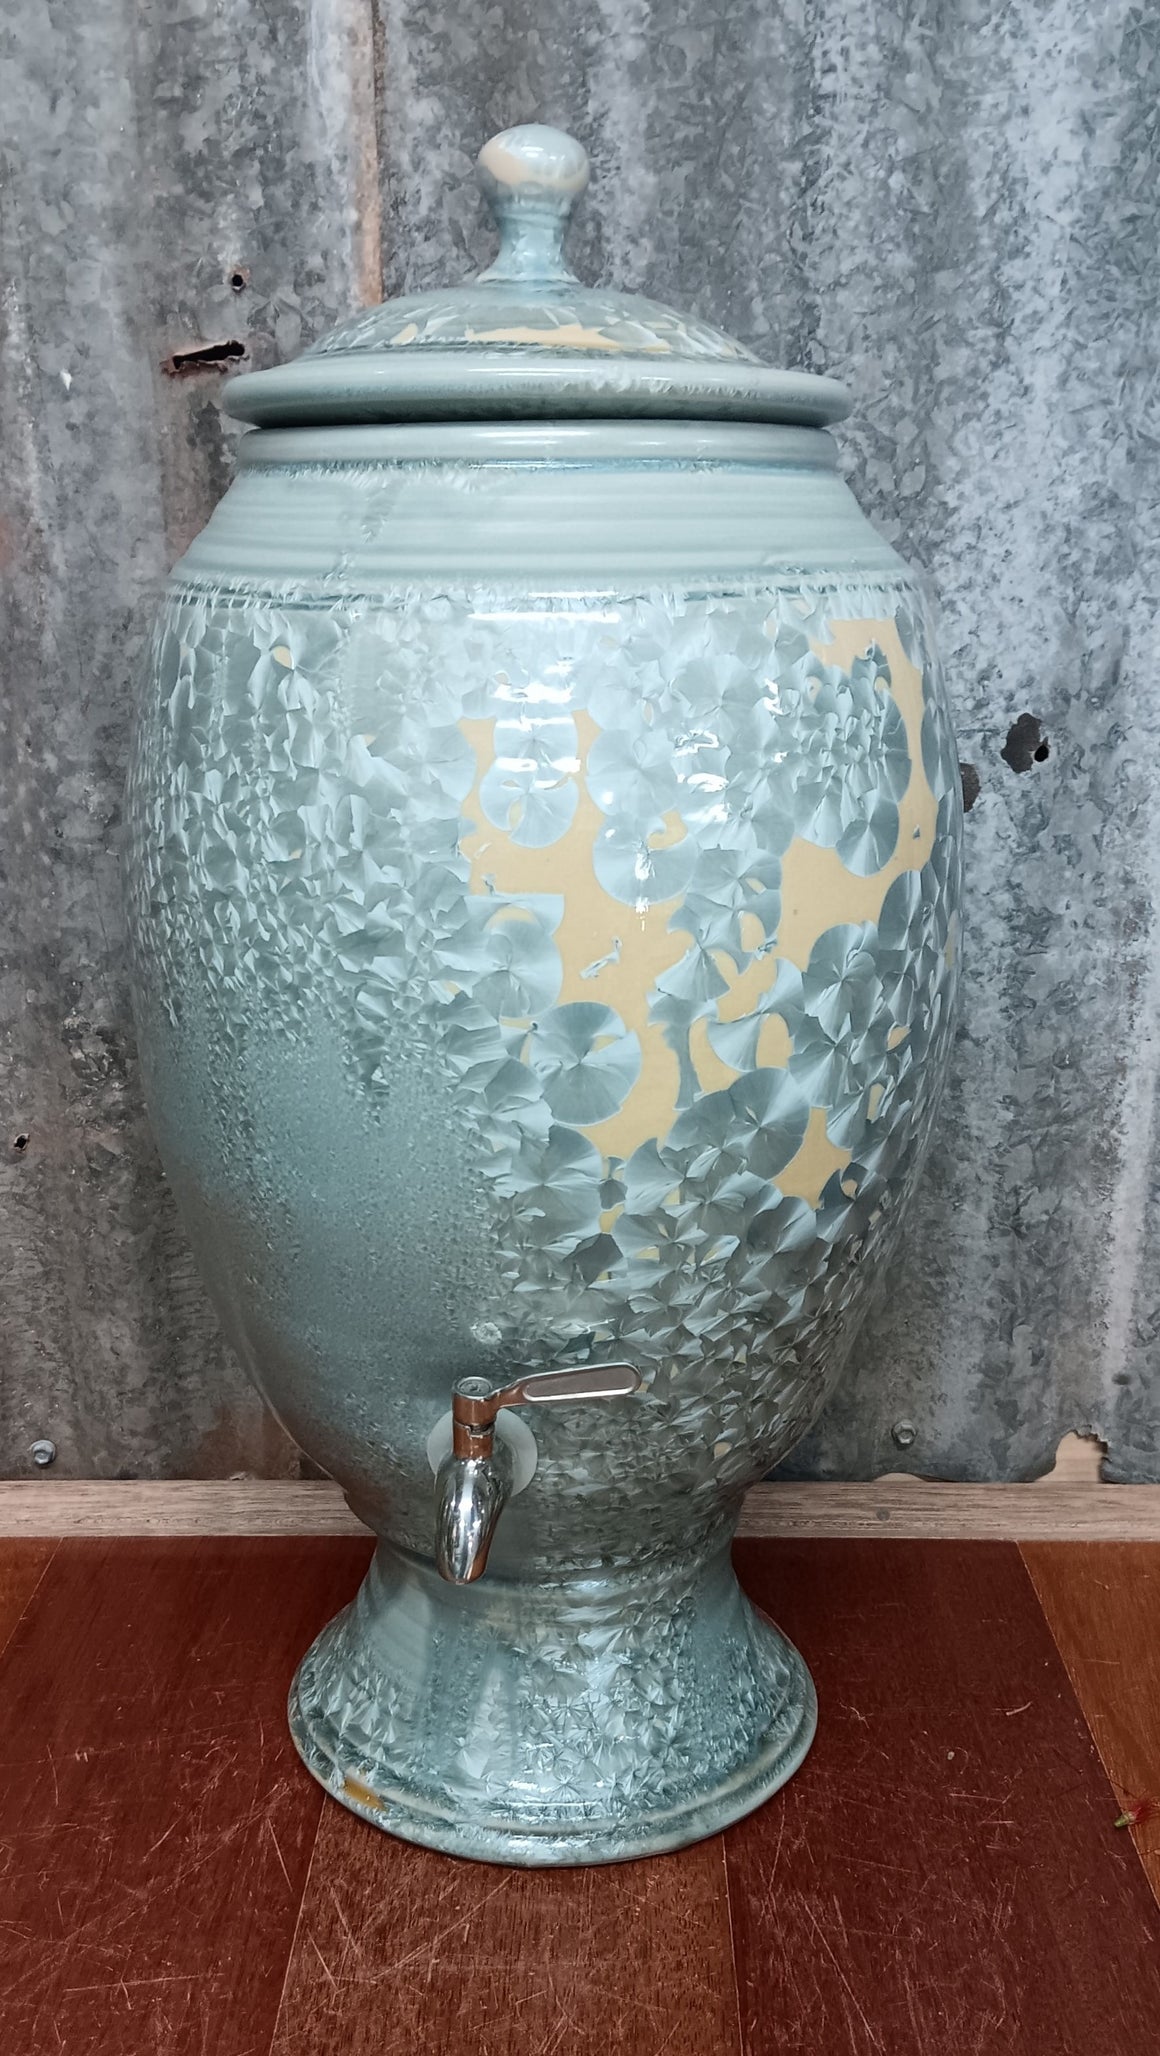 Crystalline Nickle Ceramic Water Filter - Peter Wallace Pottery